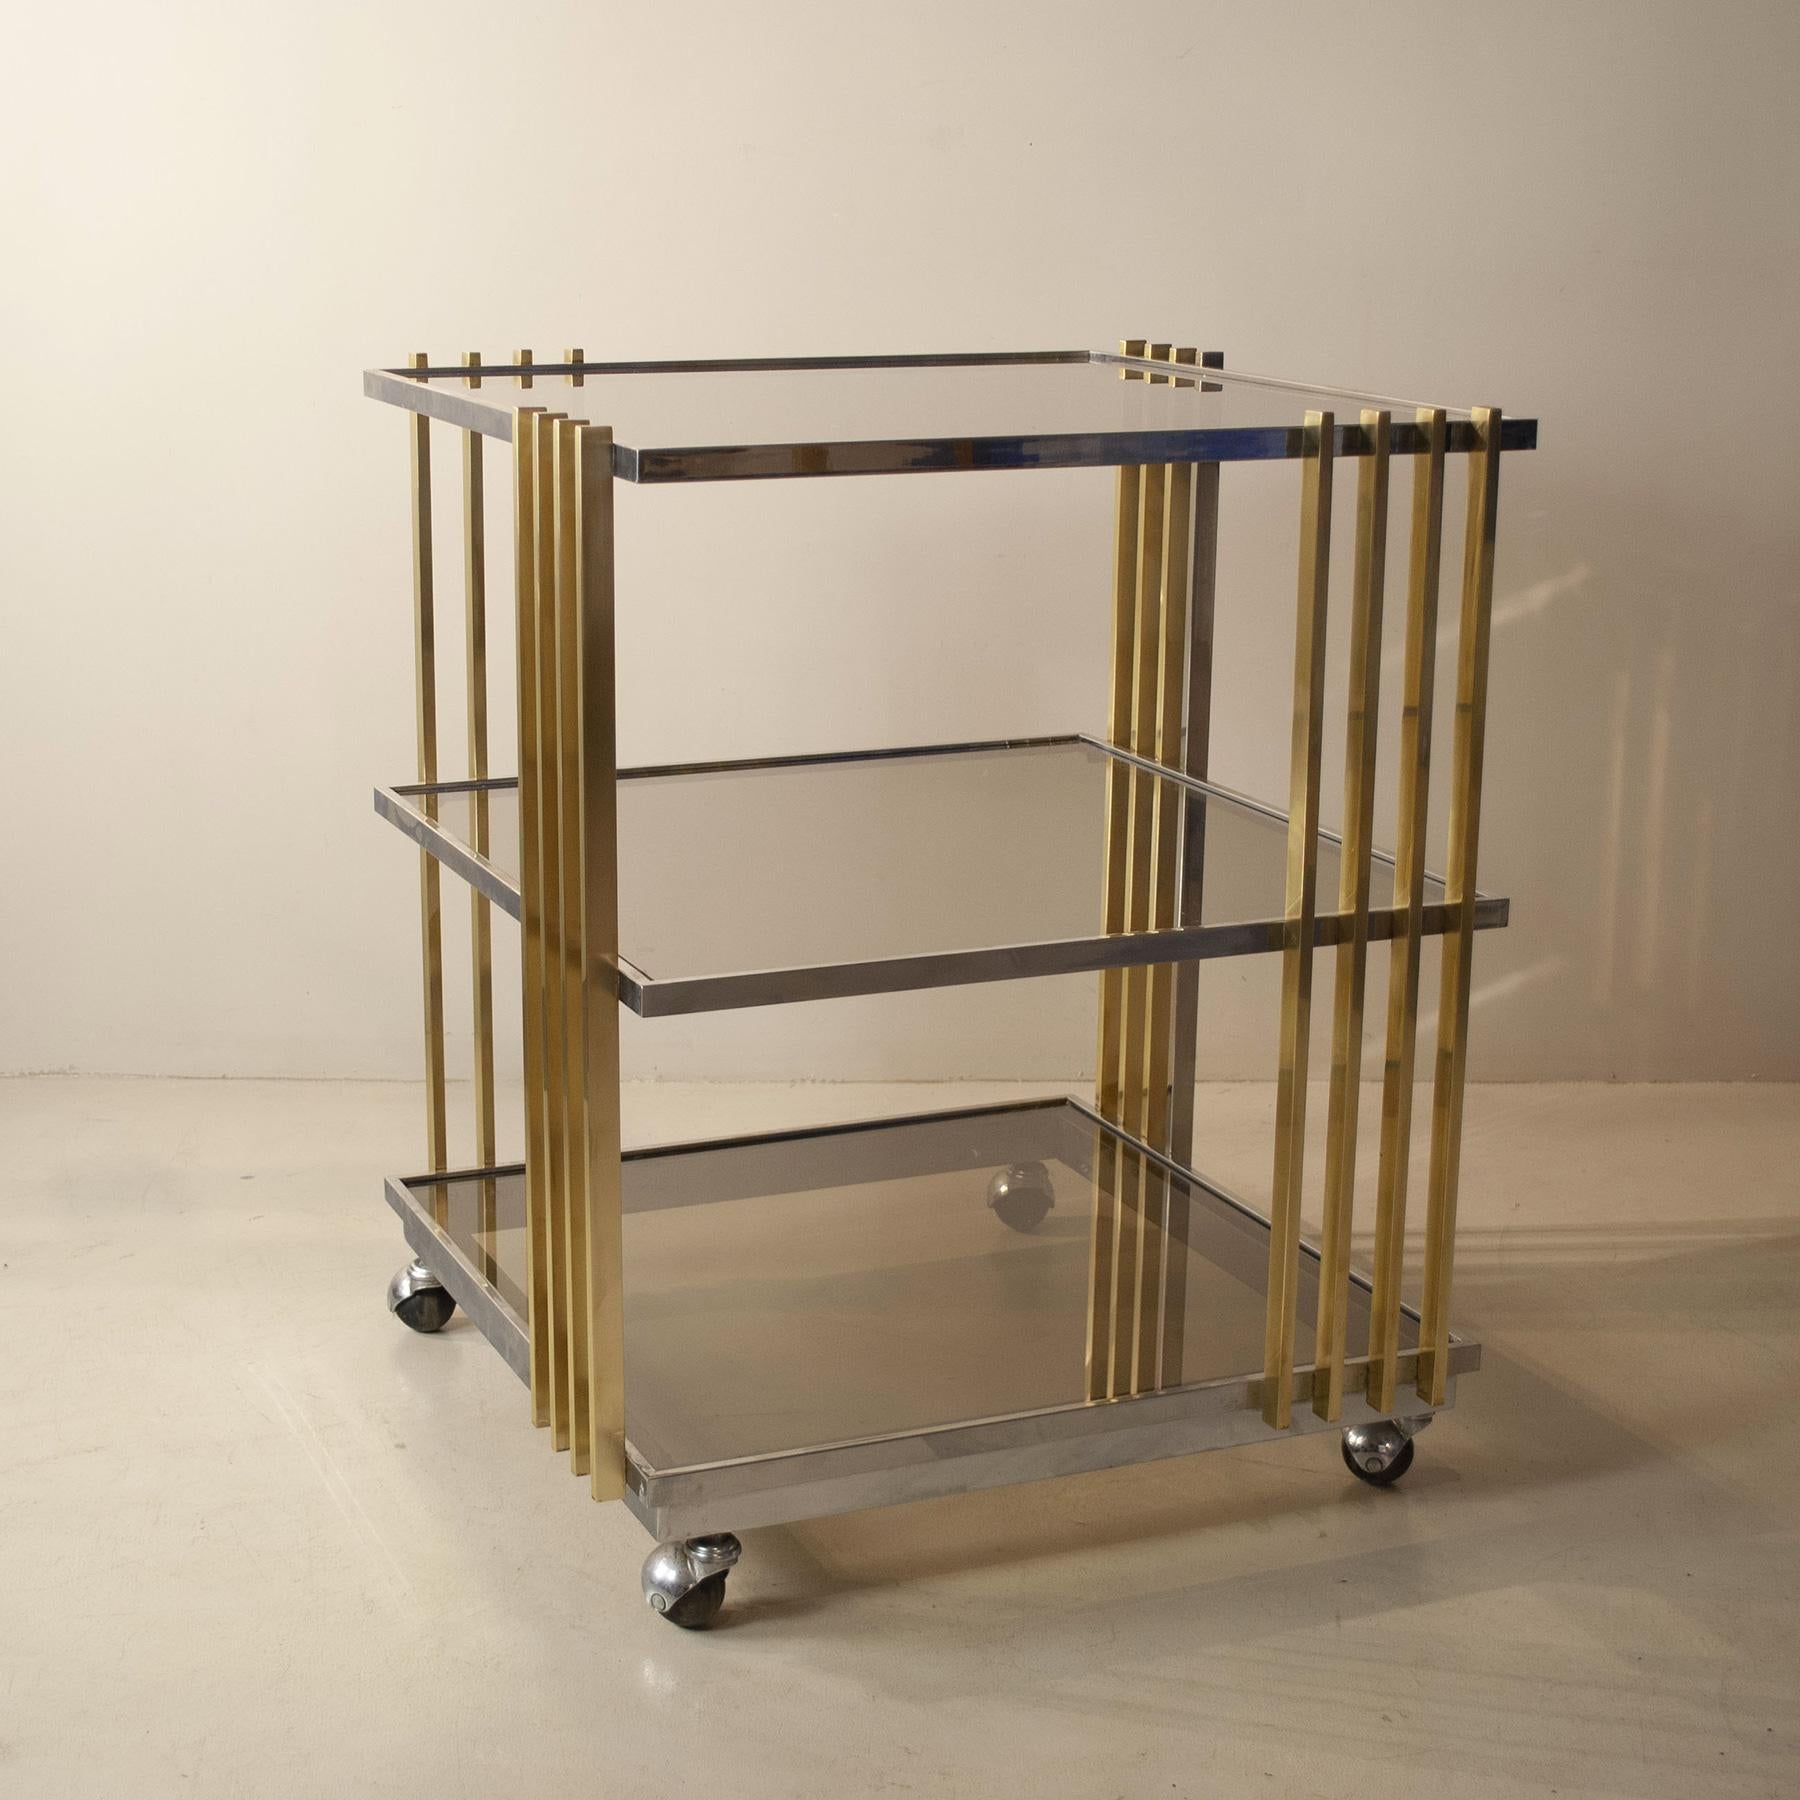 Elegant 70's trolley bar in brass and steel, smoked glass shelves, attr. designer Romeo Rega.
Romeo Rega is born in Rome on 10 October 1925, third of six children, born and raised in the Trastevere district, in the heart of Rome.  THE FIRST BIG